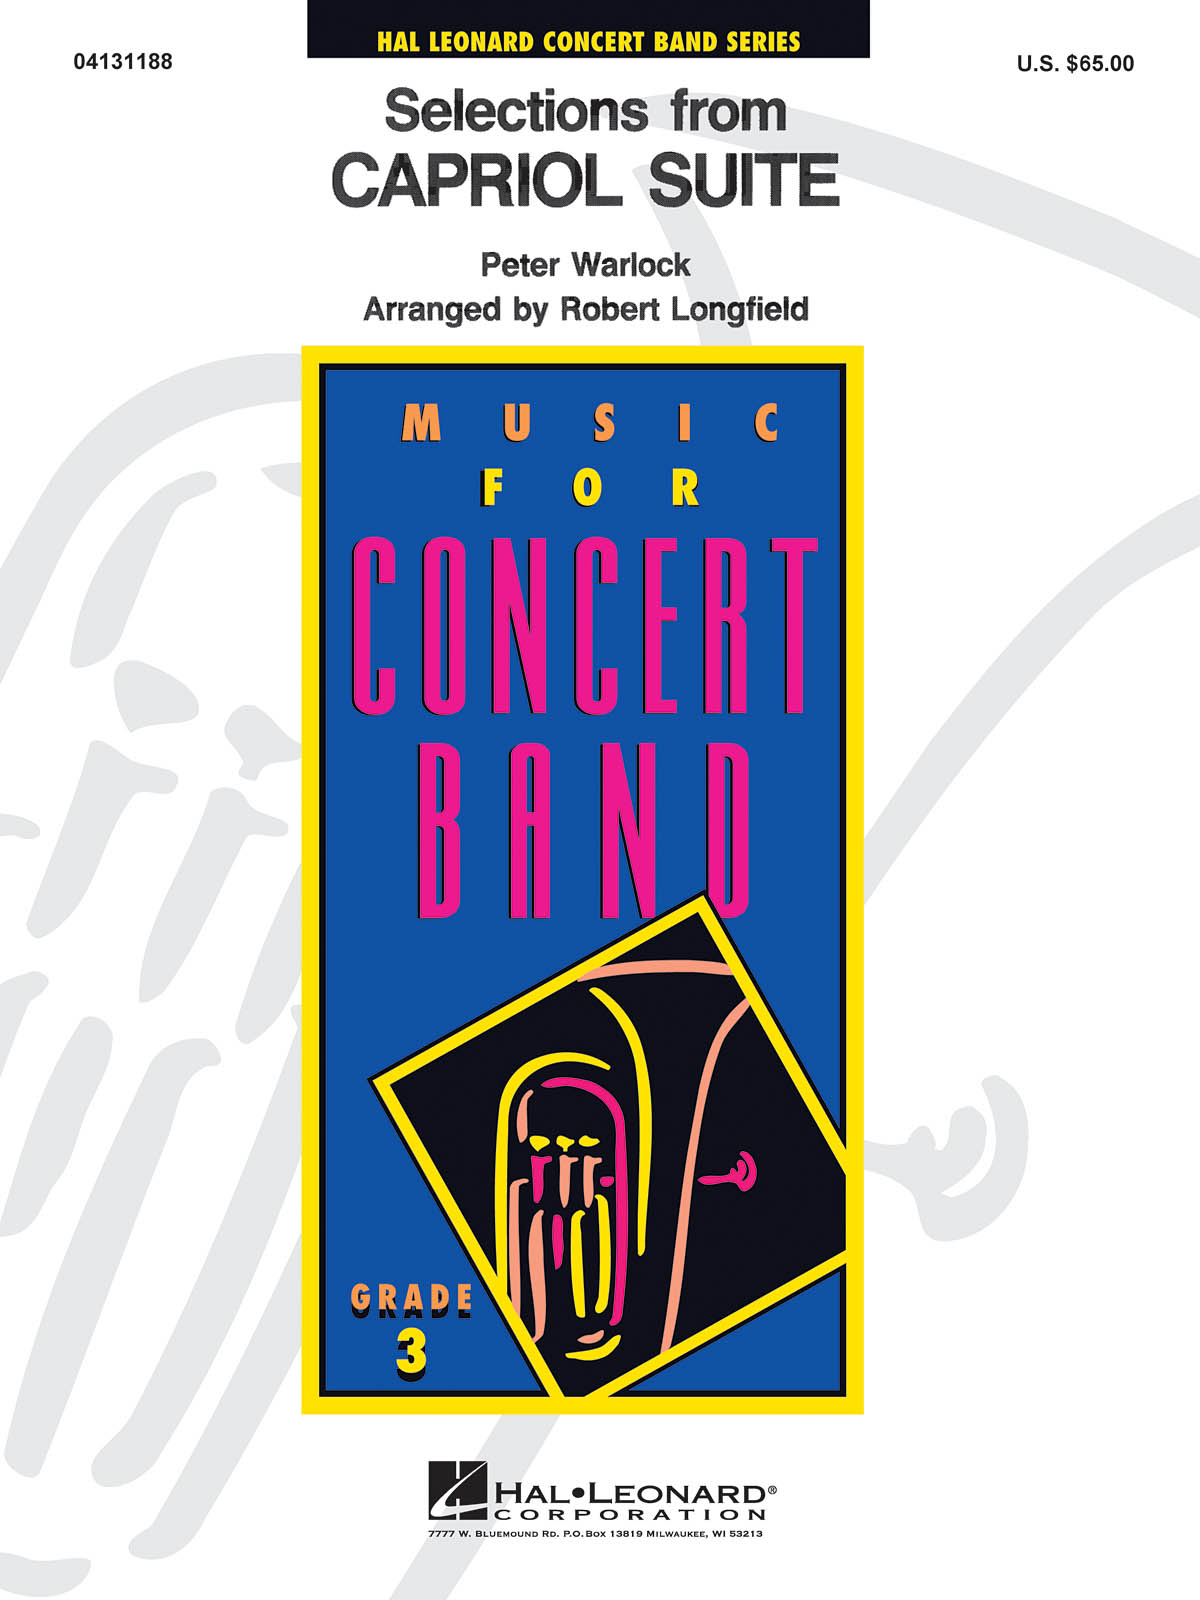 Peter Warlock: Selections from Capriol Suite: Concert Band: Score & Parts